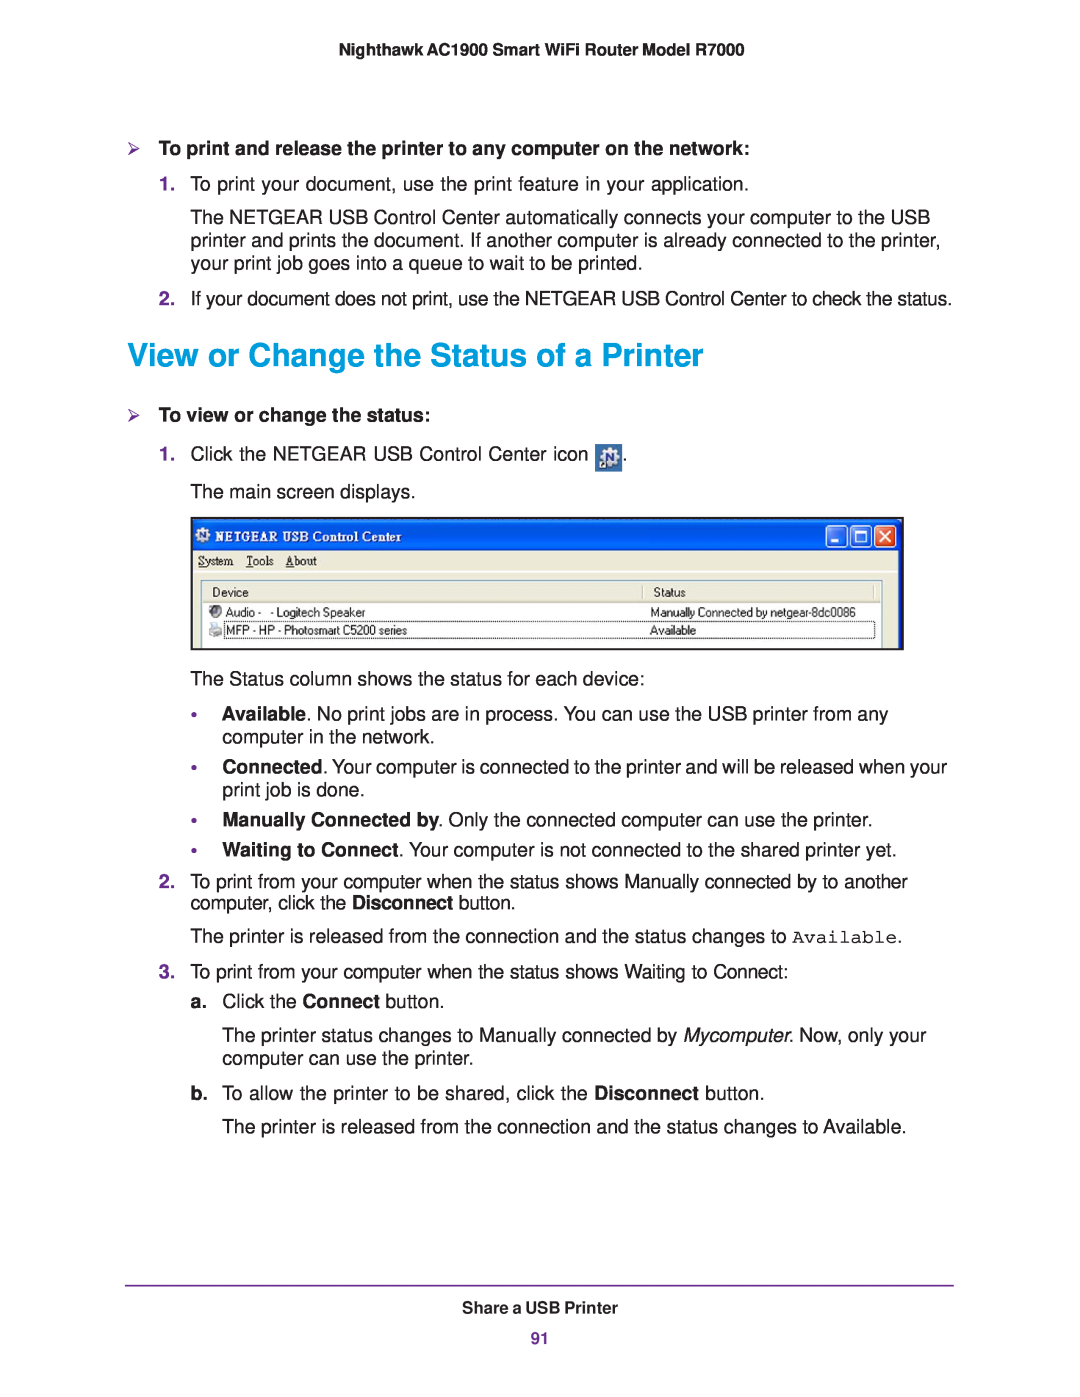 NETGEAR R7000 View or Change the Status of a Printer,  To print and release the printer to any computer on the network 